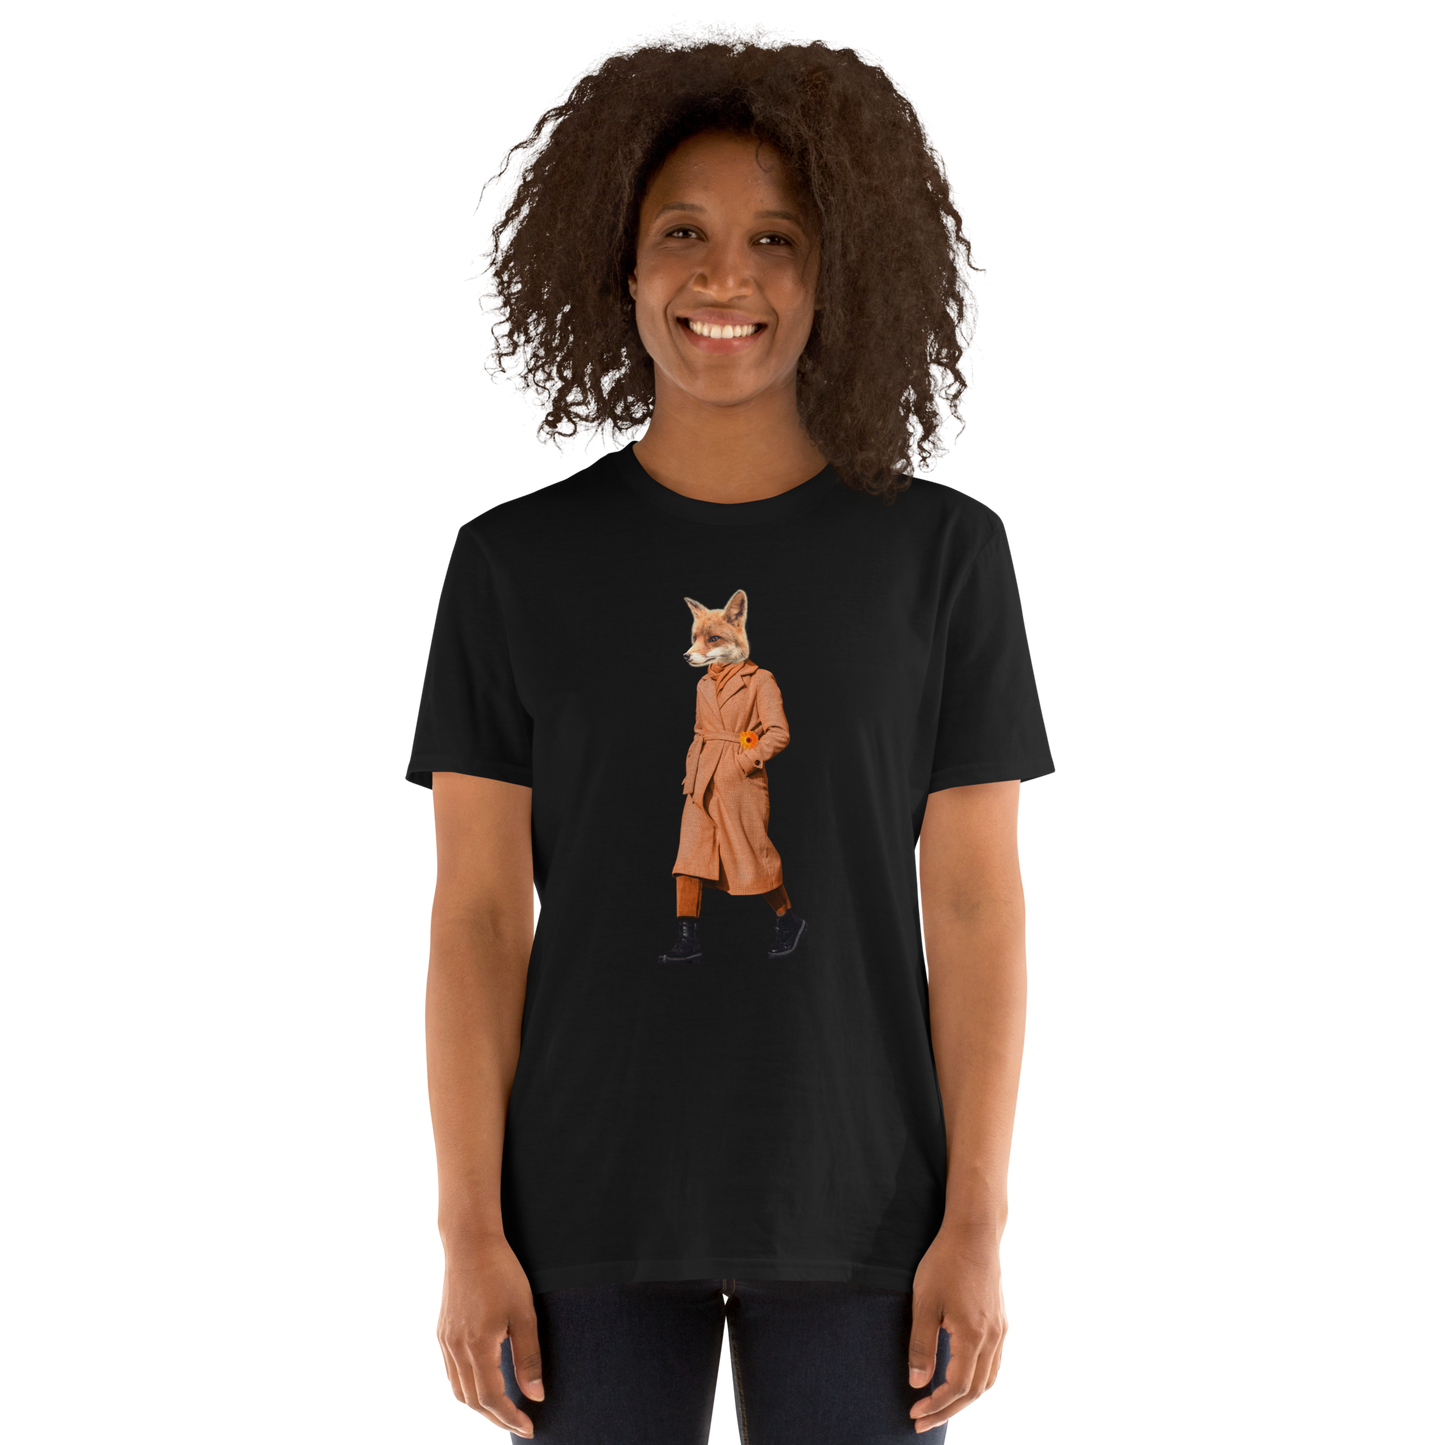 Smiling woman wearing a Black Anthropomorphic Fox T-Shirt featuring a sly Anthropomorphic Fox In a Trench Coat graphic on the chest - Funny Graphic Fox T-Shirts - Boozy Fox